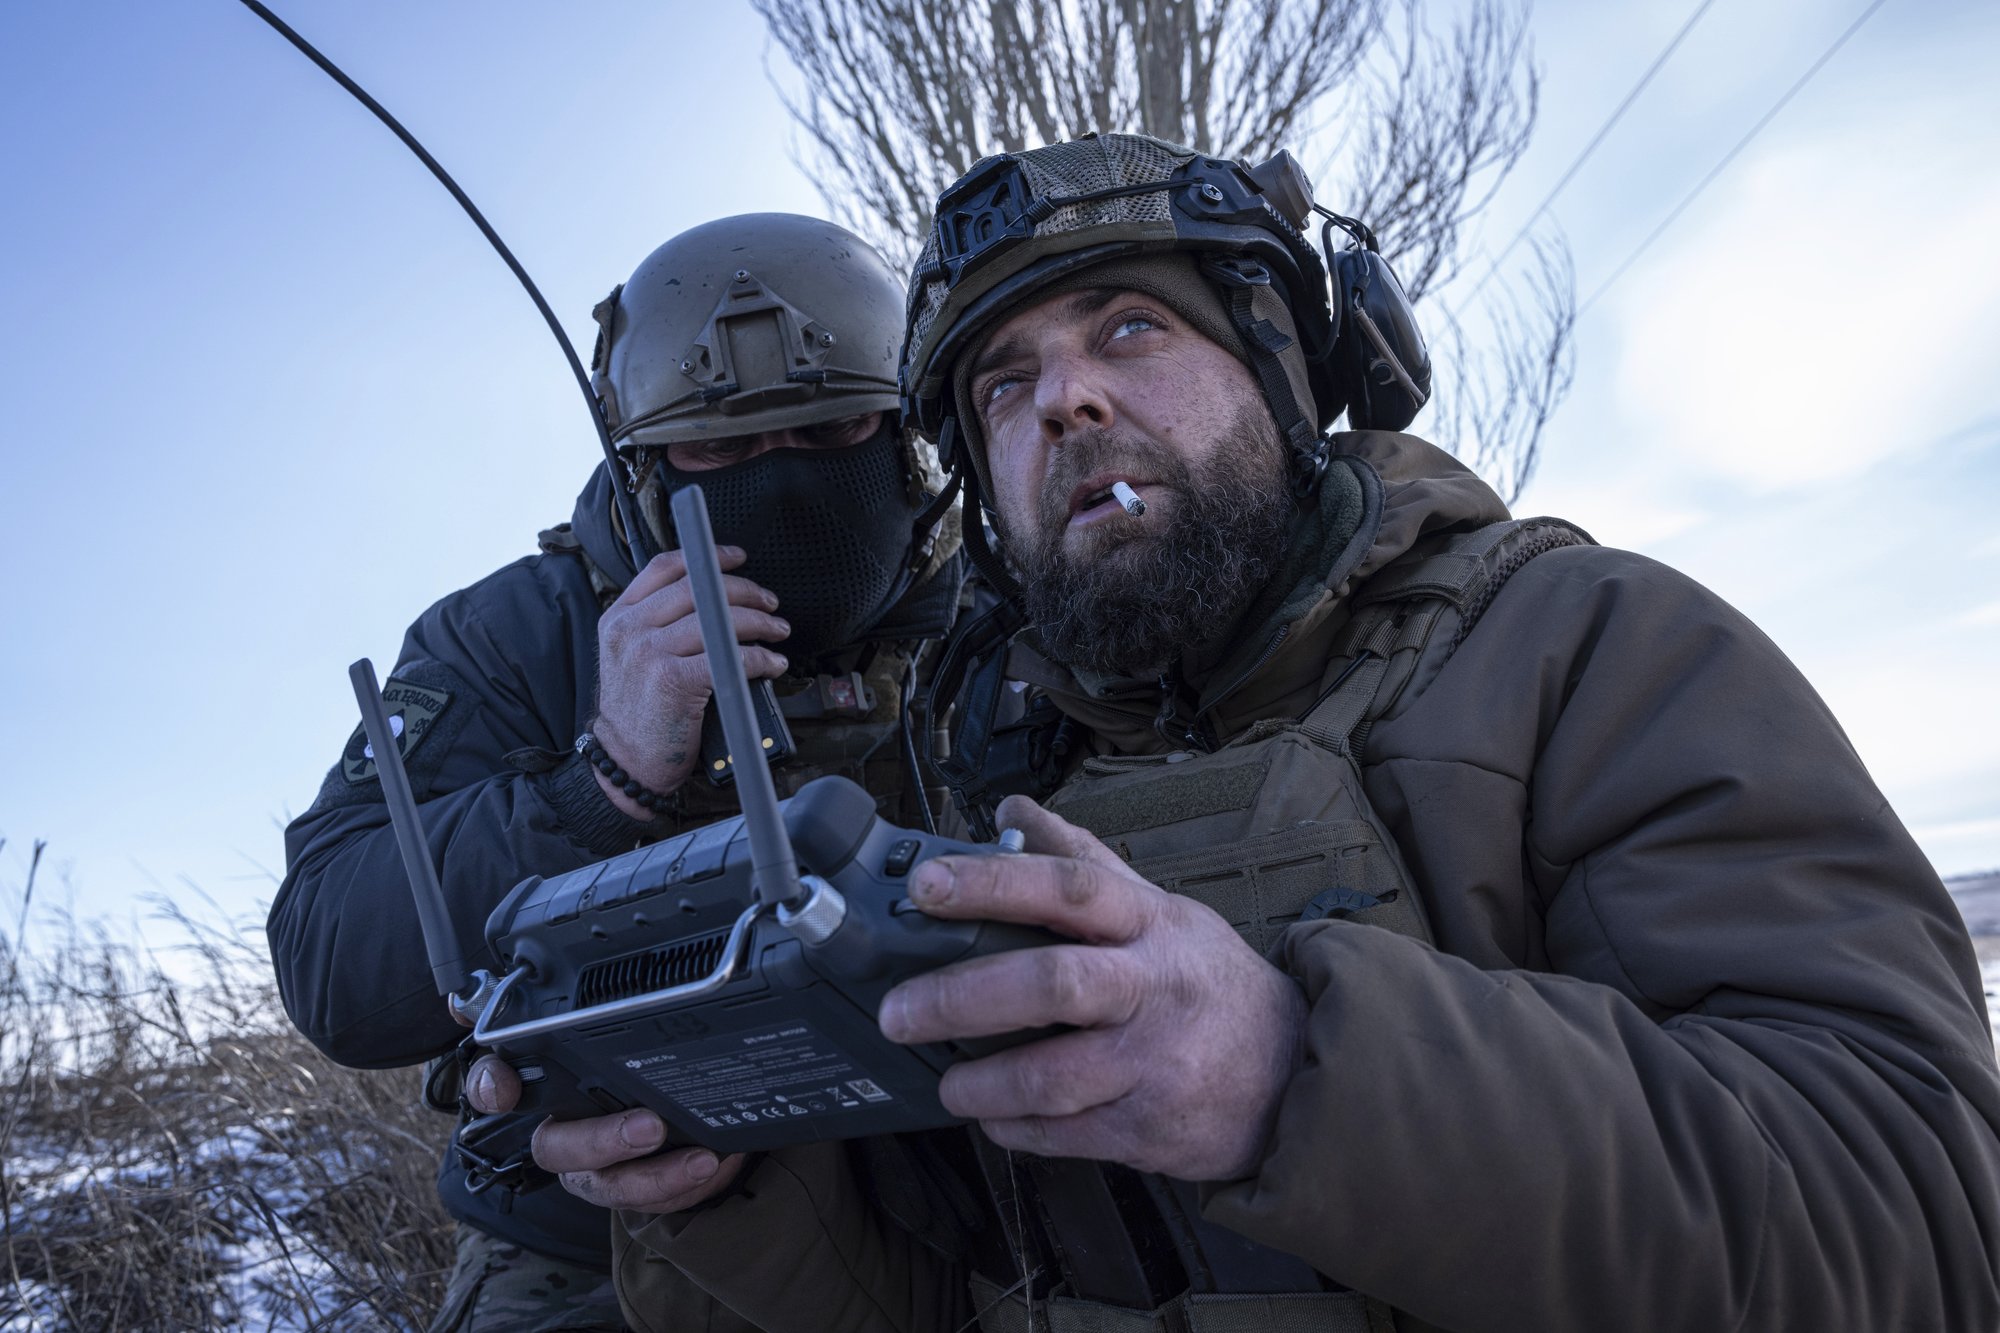 A Ukrainian serviceman aka Zakhar, right and commander of a unit aka Kurt, look on a screen of a drone remote control during fighting, at the frontline in Donetsk region, Ukraine, Monday, Feb. 13, 2023. AP photo by Evgeniy Maloletka.